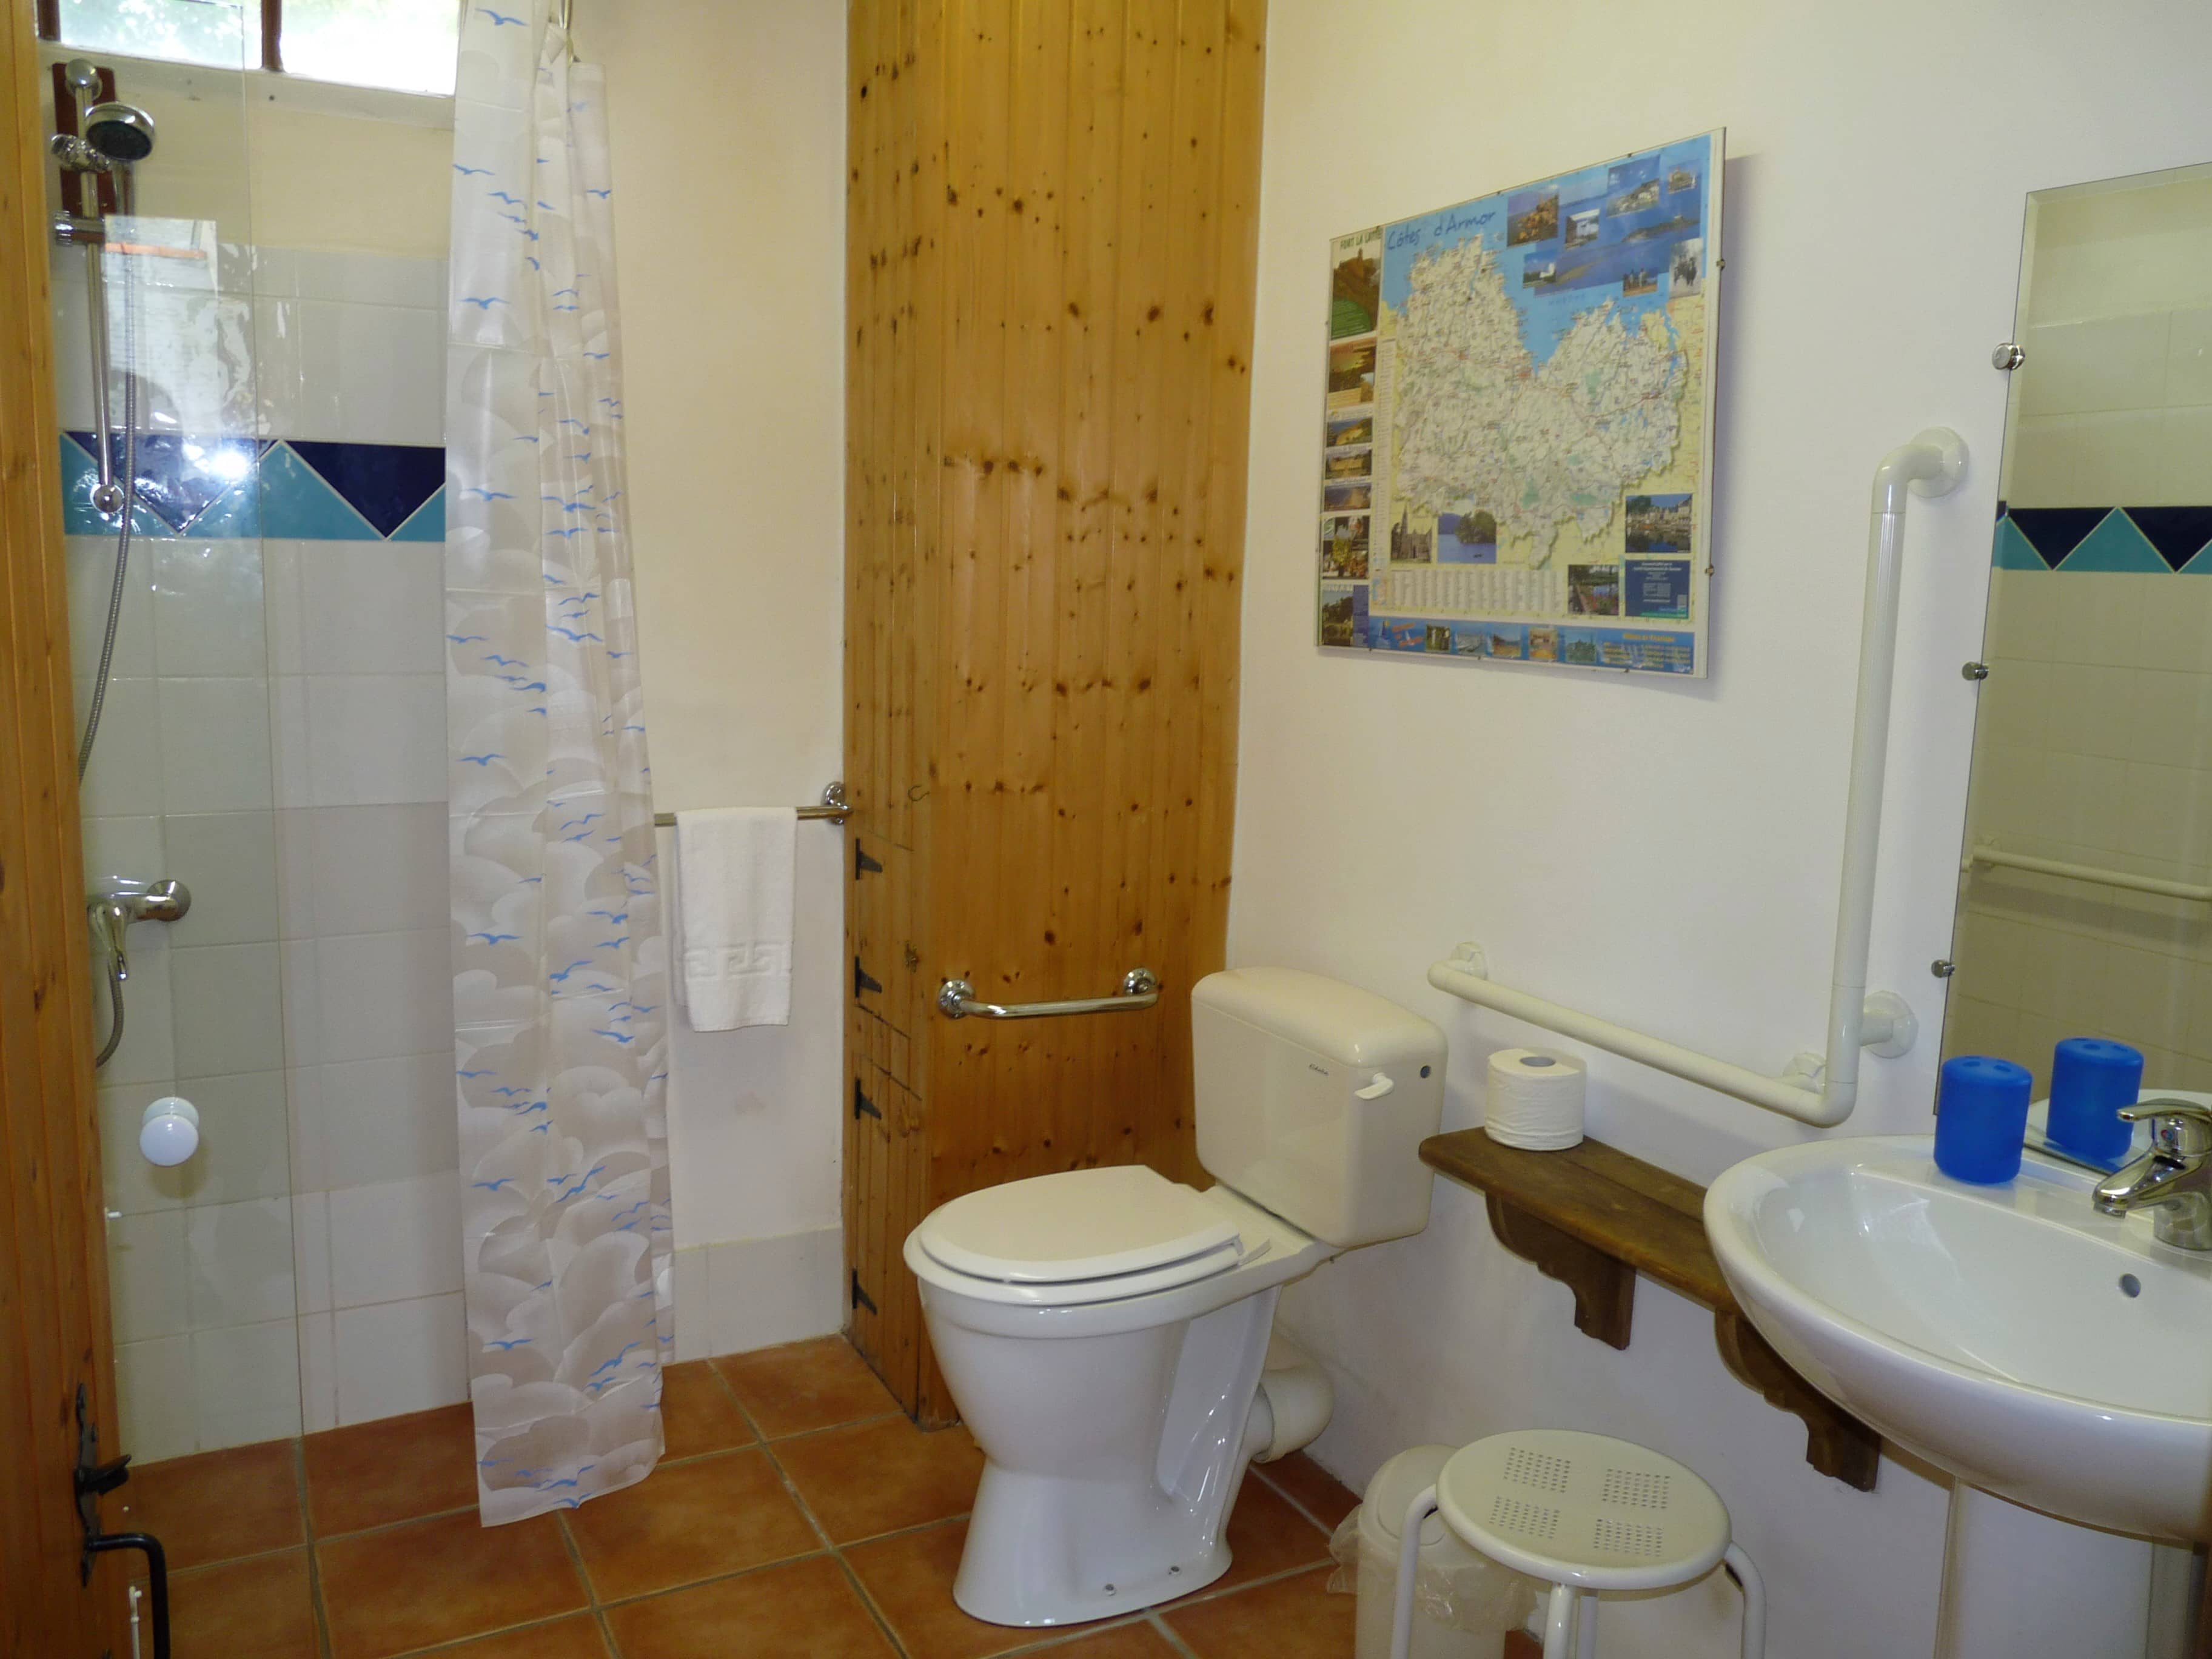 Clean and well-appointed toilet of La Julerie cottage in Brittany, France, with a ceramic sink, tiled walls, soft lighting, and modern decoration. Perfect for a comfortable and pleasant toilet experience.